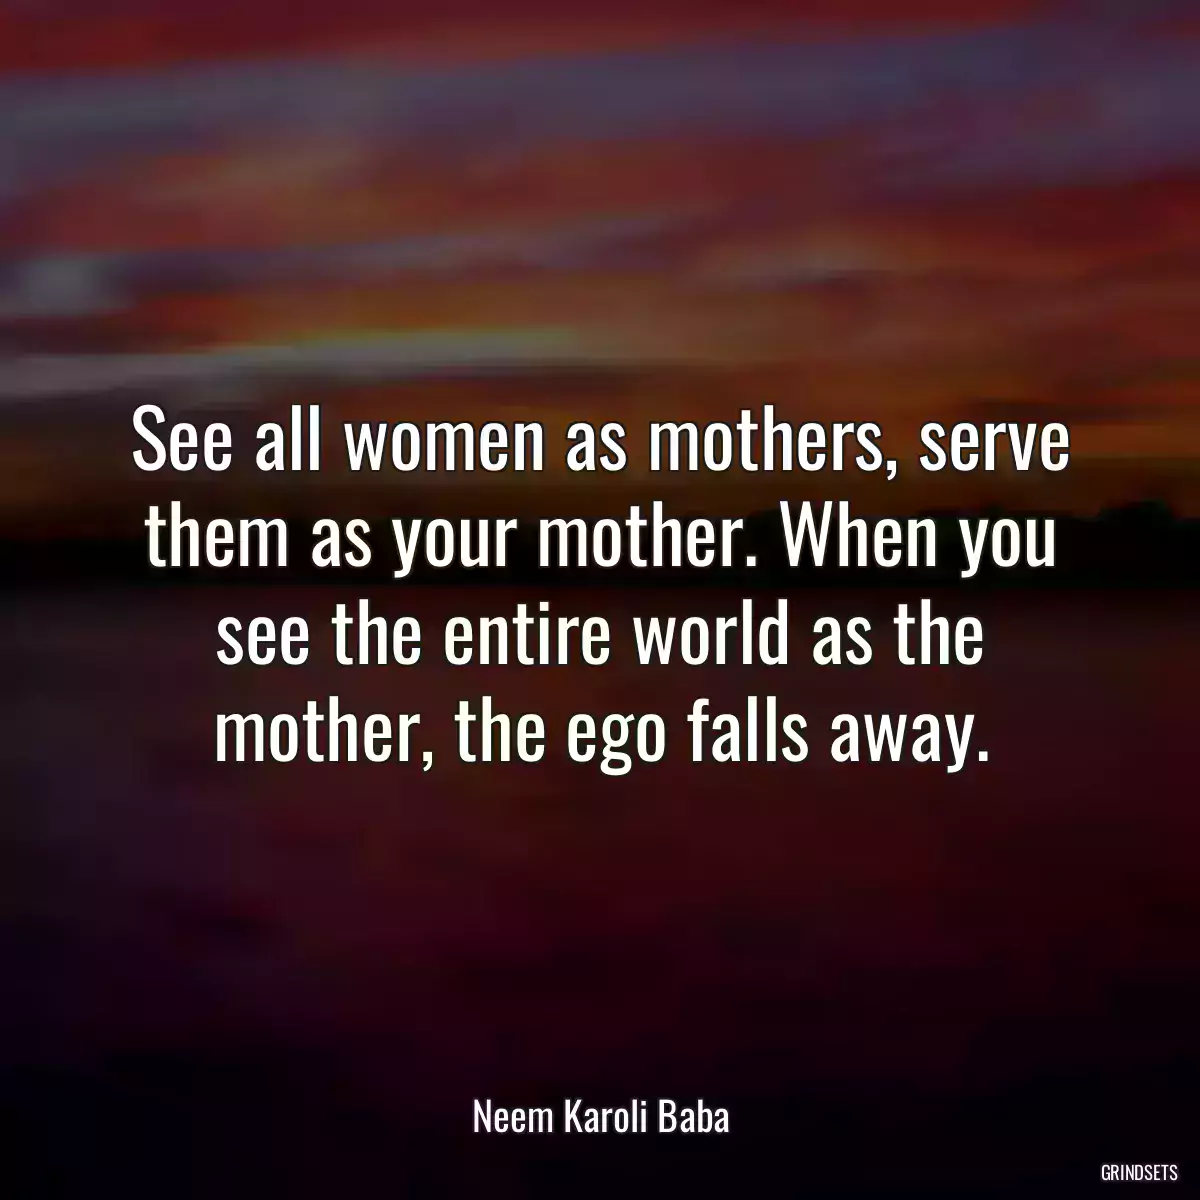 See all women as mothers, serve them as your mother. When you see the entire world as the mother, the ego falls away.